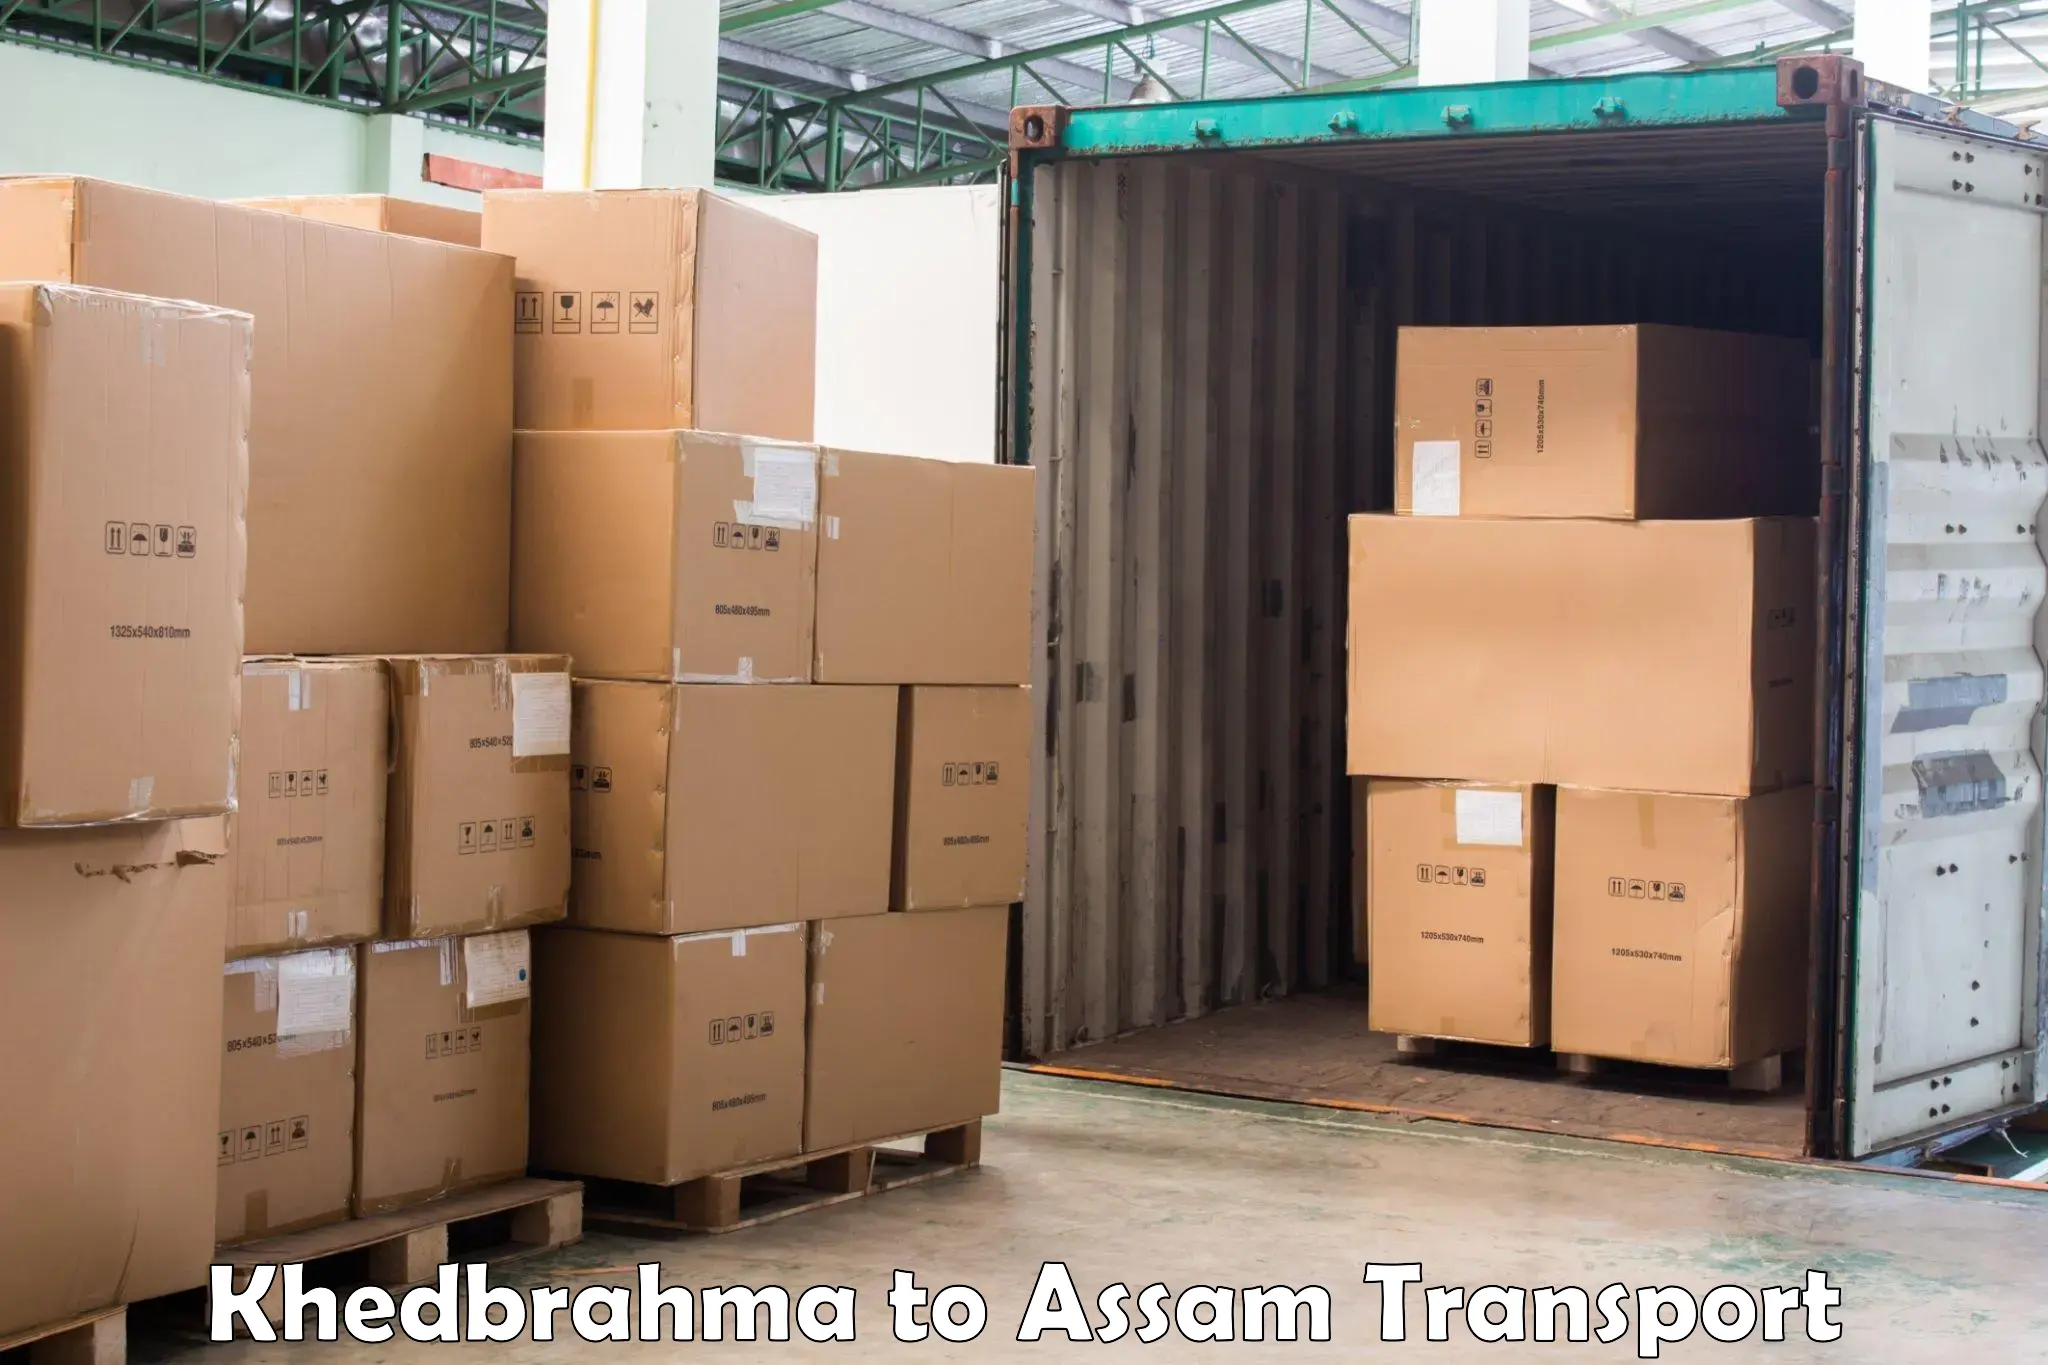 Vehicle transport services in Khedbrahma to Tezpur University